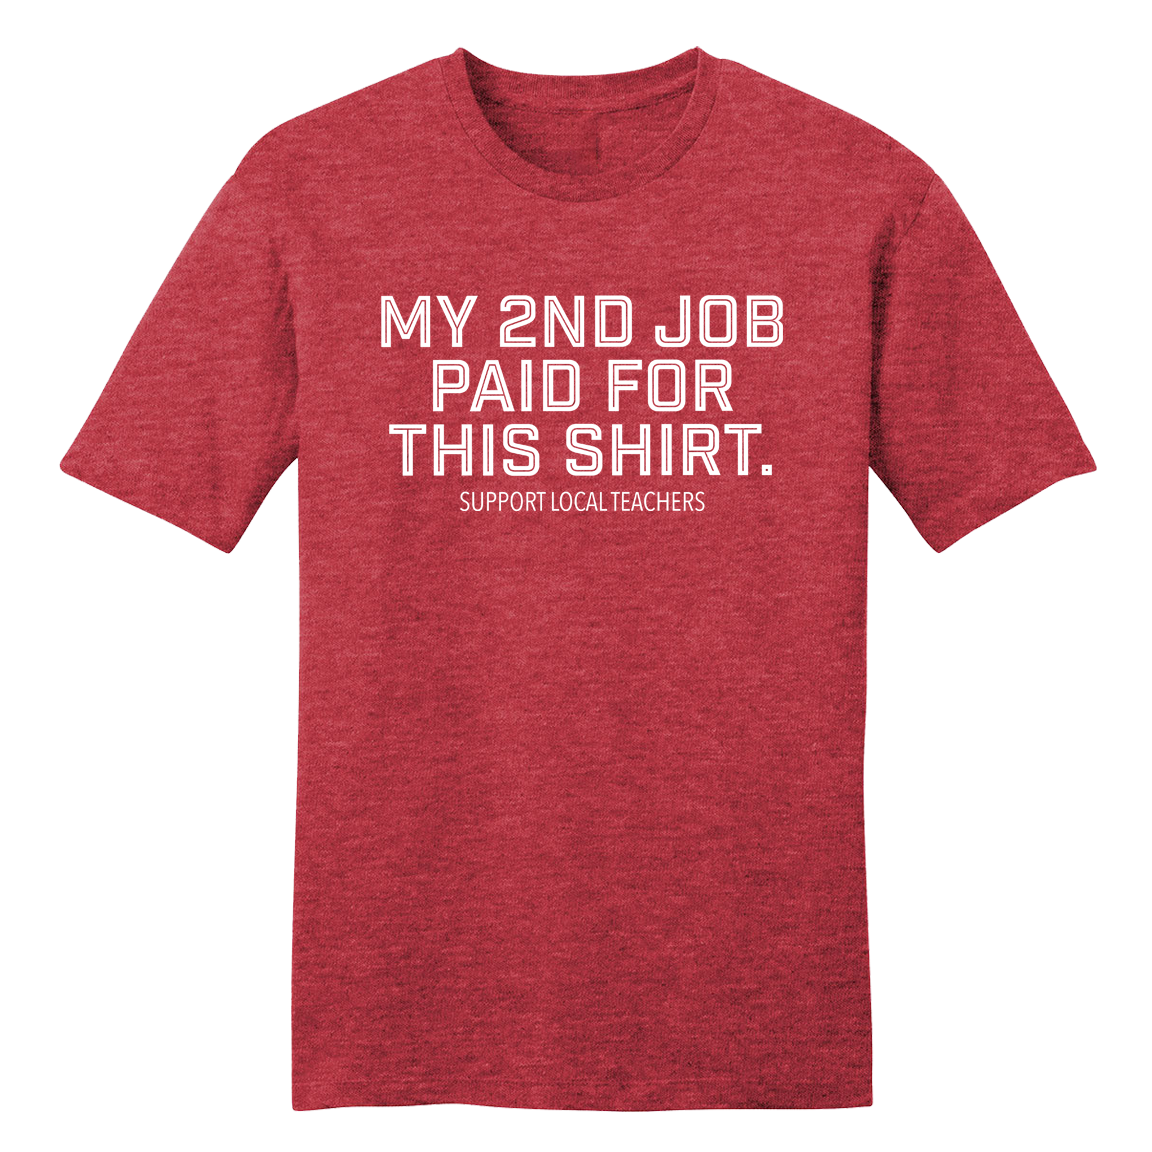 My Second Job Paid For This Shirt tee